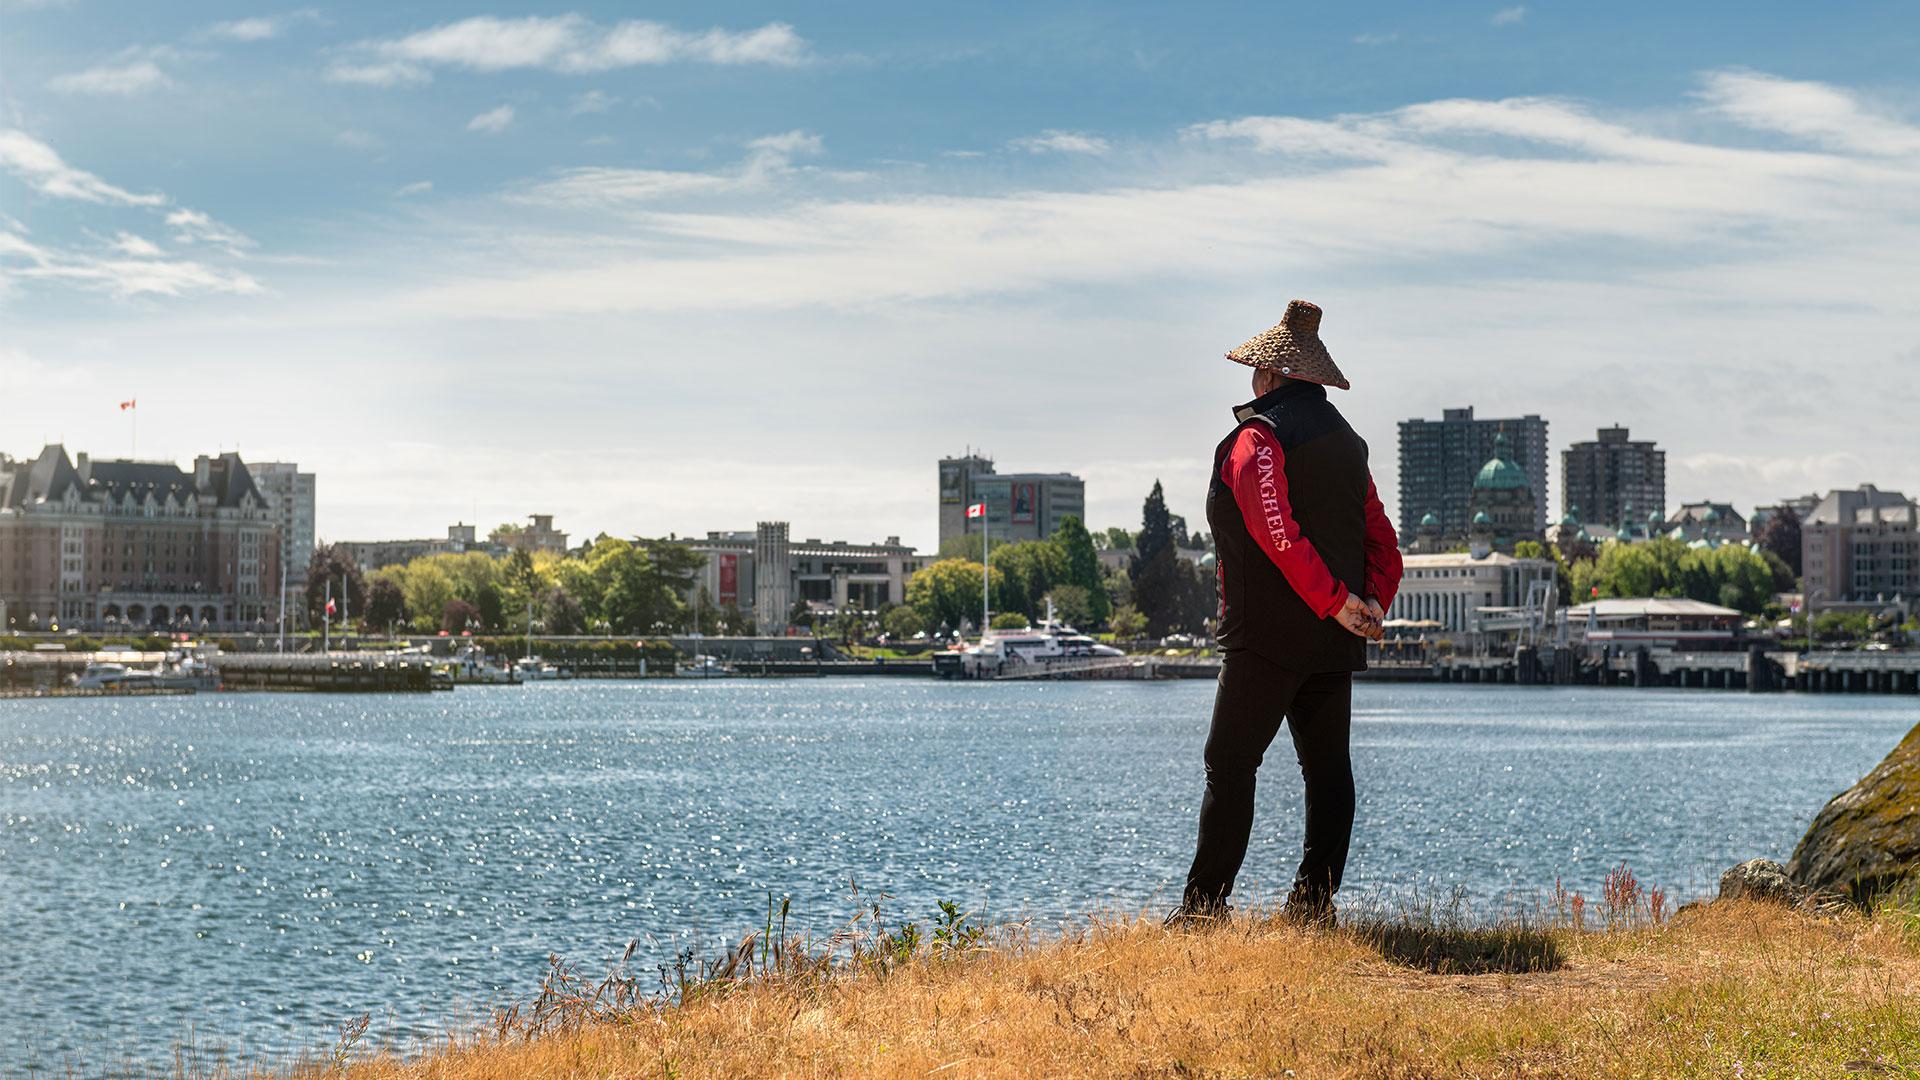 A person looks out over the water in Victoria, BC